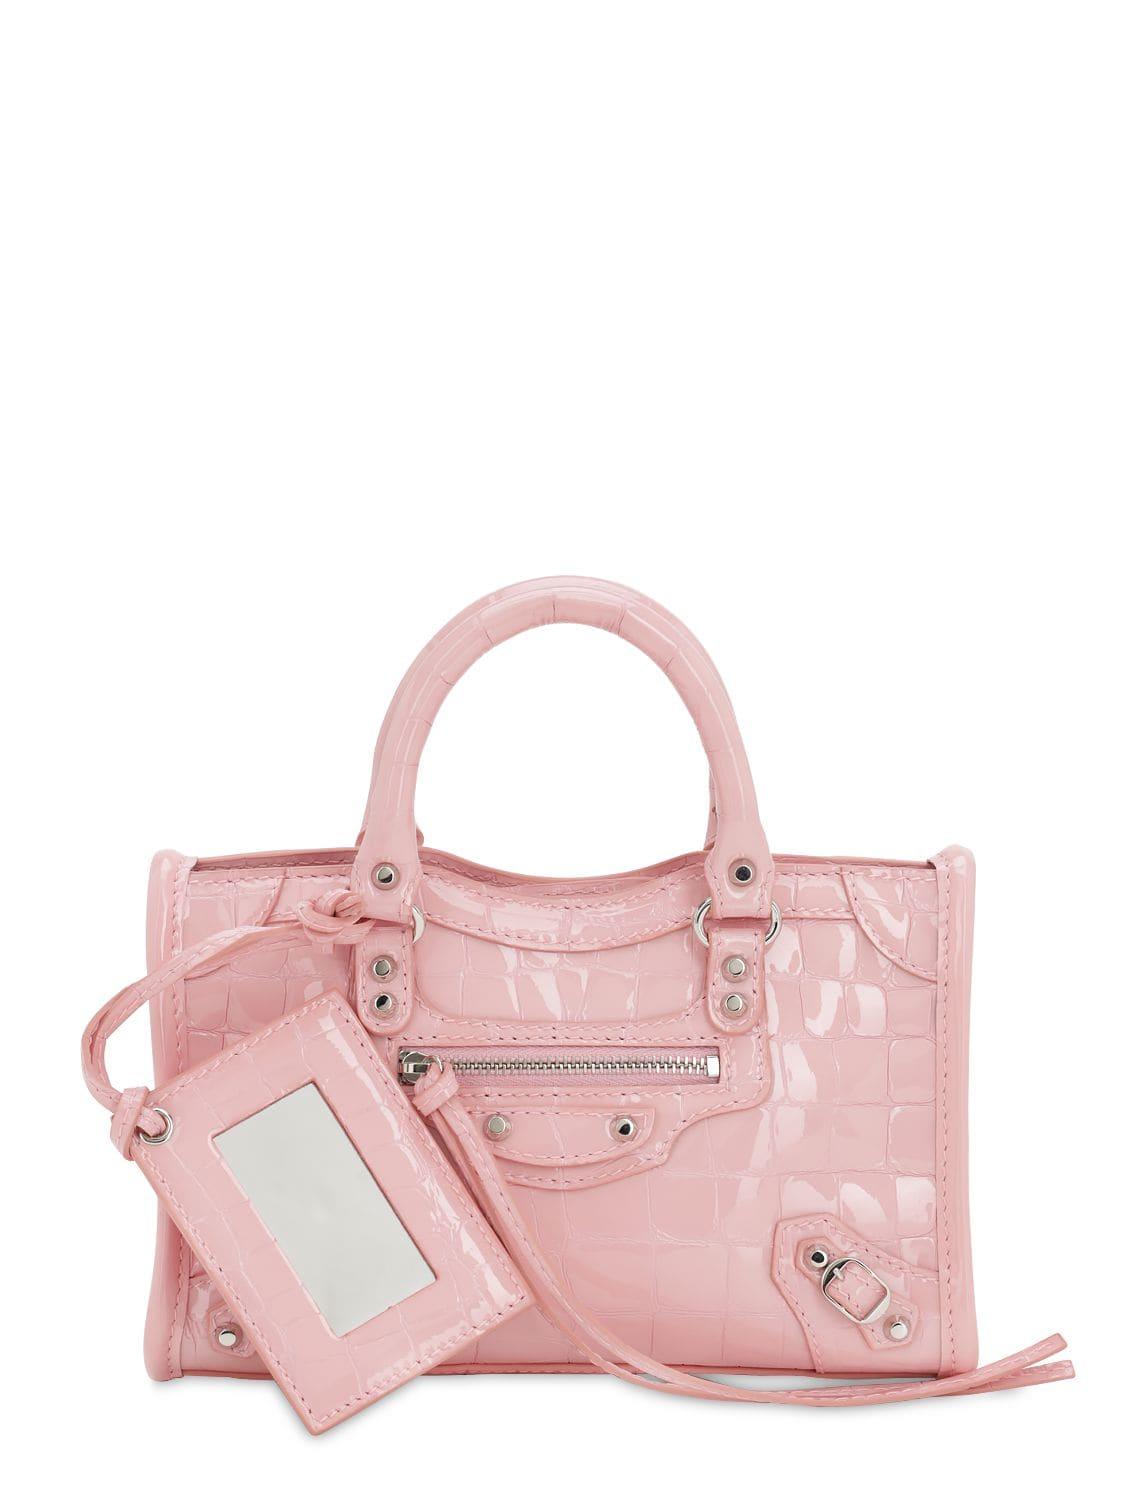 Balenciaga Nano City Croc Embossed Leather Bag in Pink | Lyst Canada